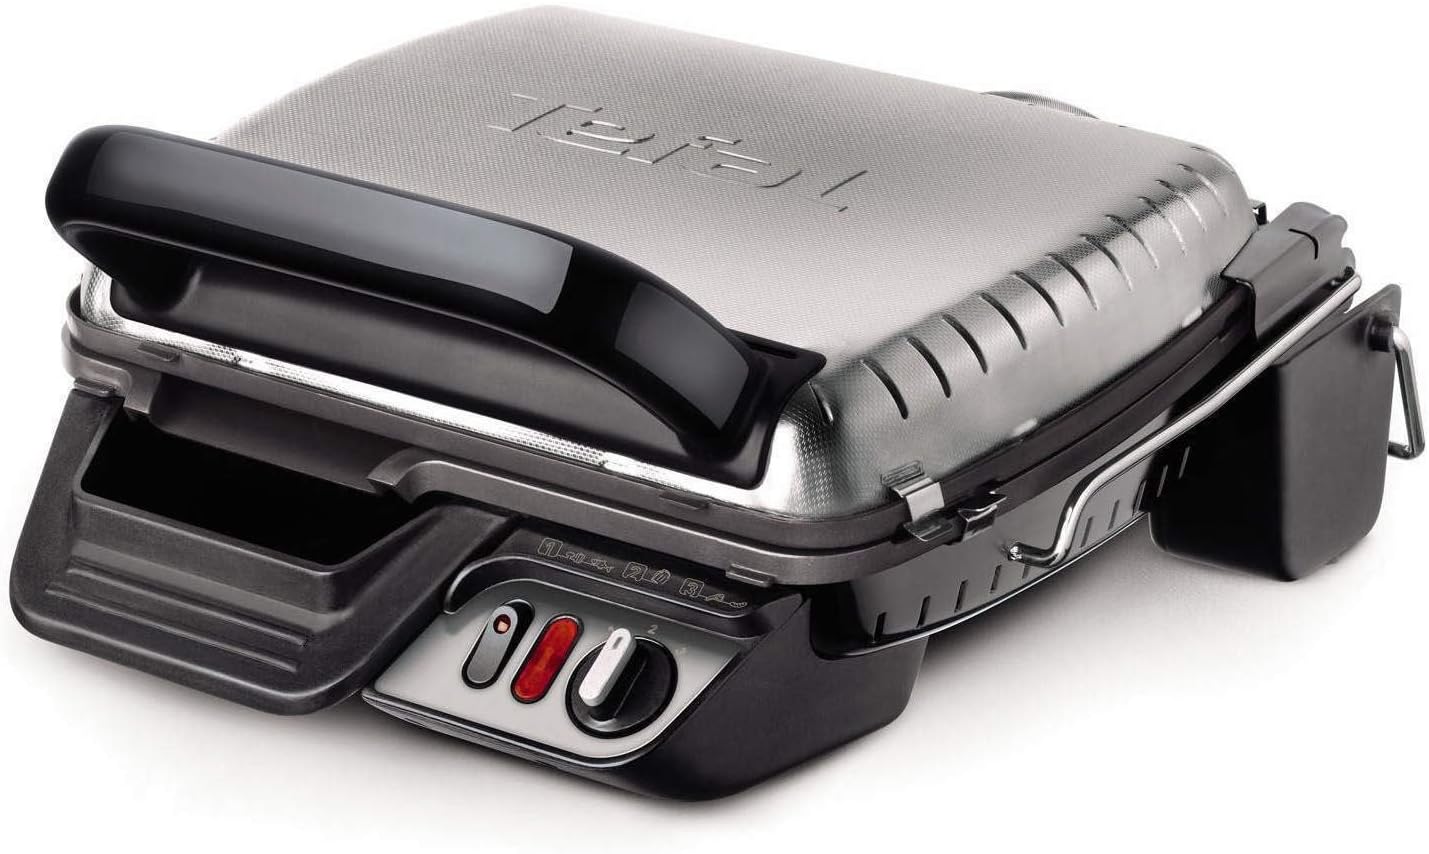 TEFAL Grill | Ultra compact Barbecue / BBQ Grill / Sandwich Maker | 1700 watts | Silver | 2 Years Warranty | GC302B28